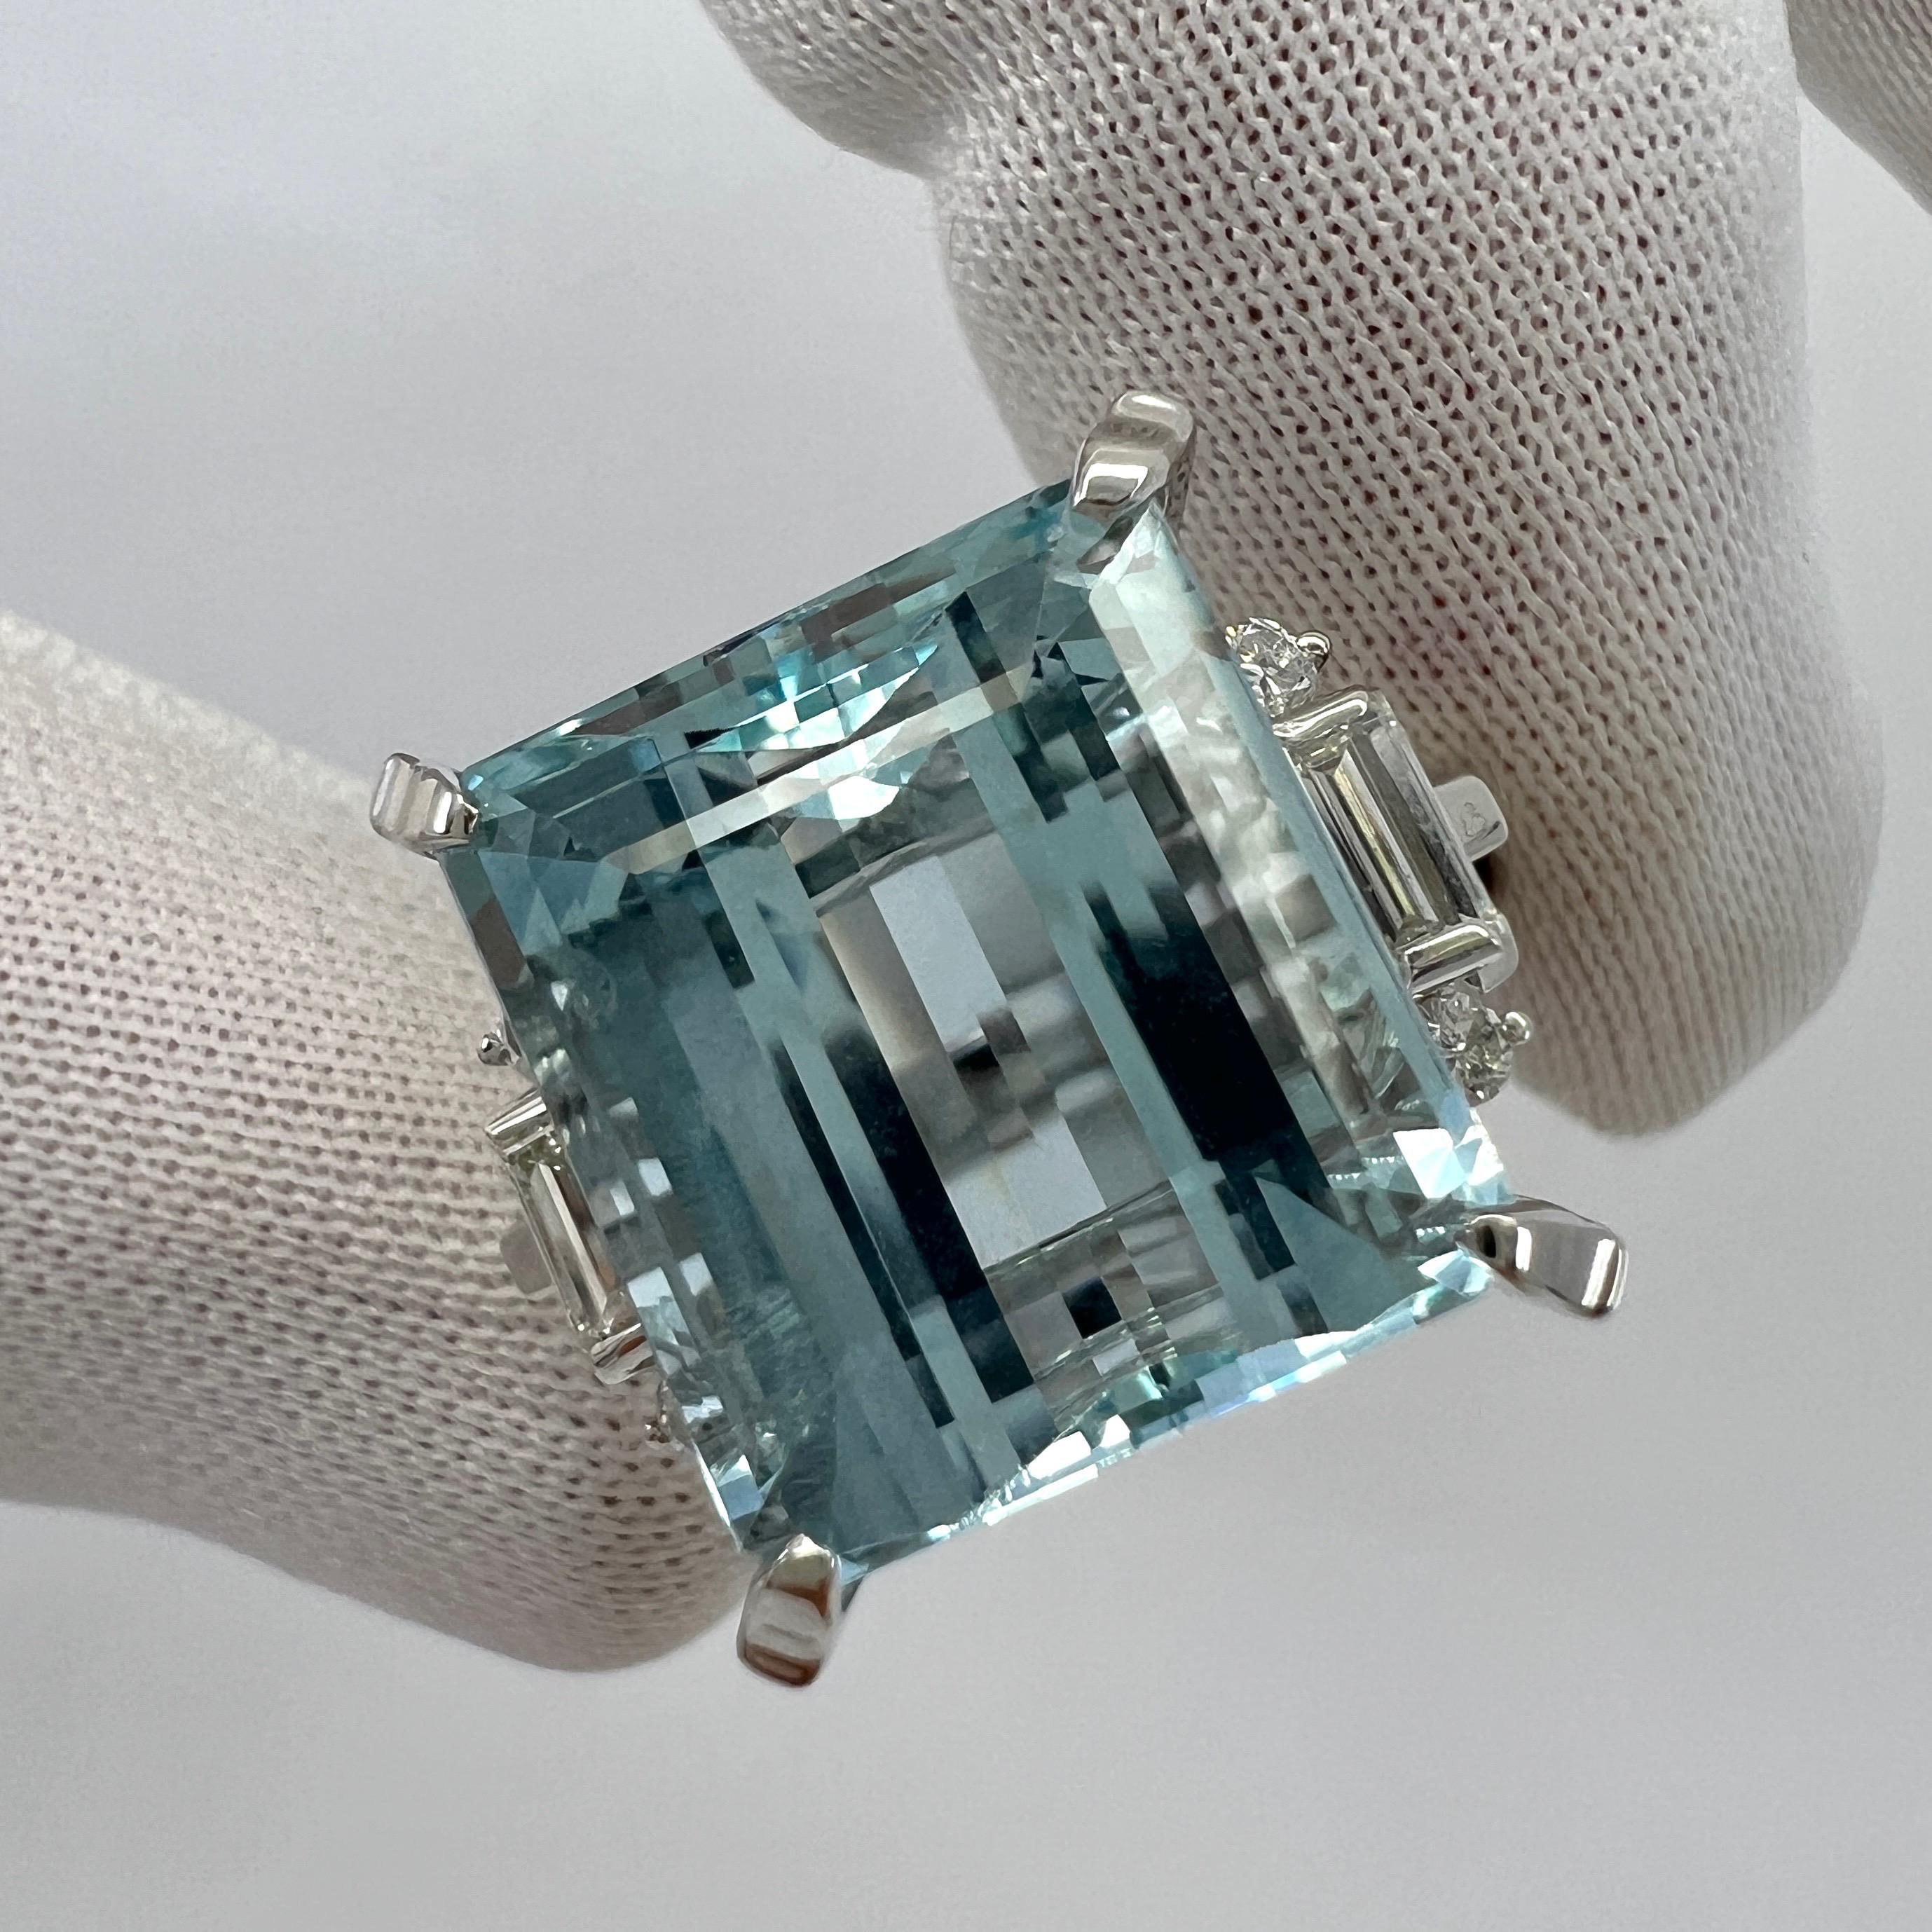 Large Blue Aquamarine And Diamond Art Deco Platinum Ring.

Stunning platinum ring with a large 10.25 carat light blue aquamarine. 
A bright blue stone with excellent clarity and a superb emerald cut. A top grade aquamarine of excellent quality. VVS